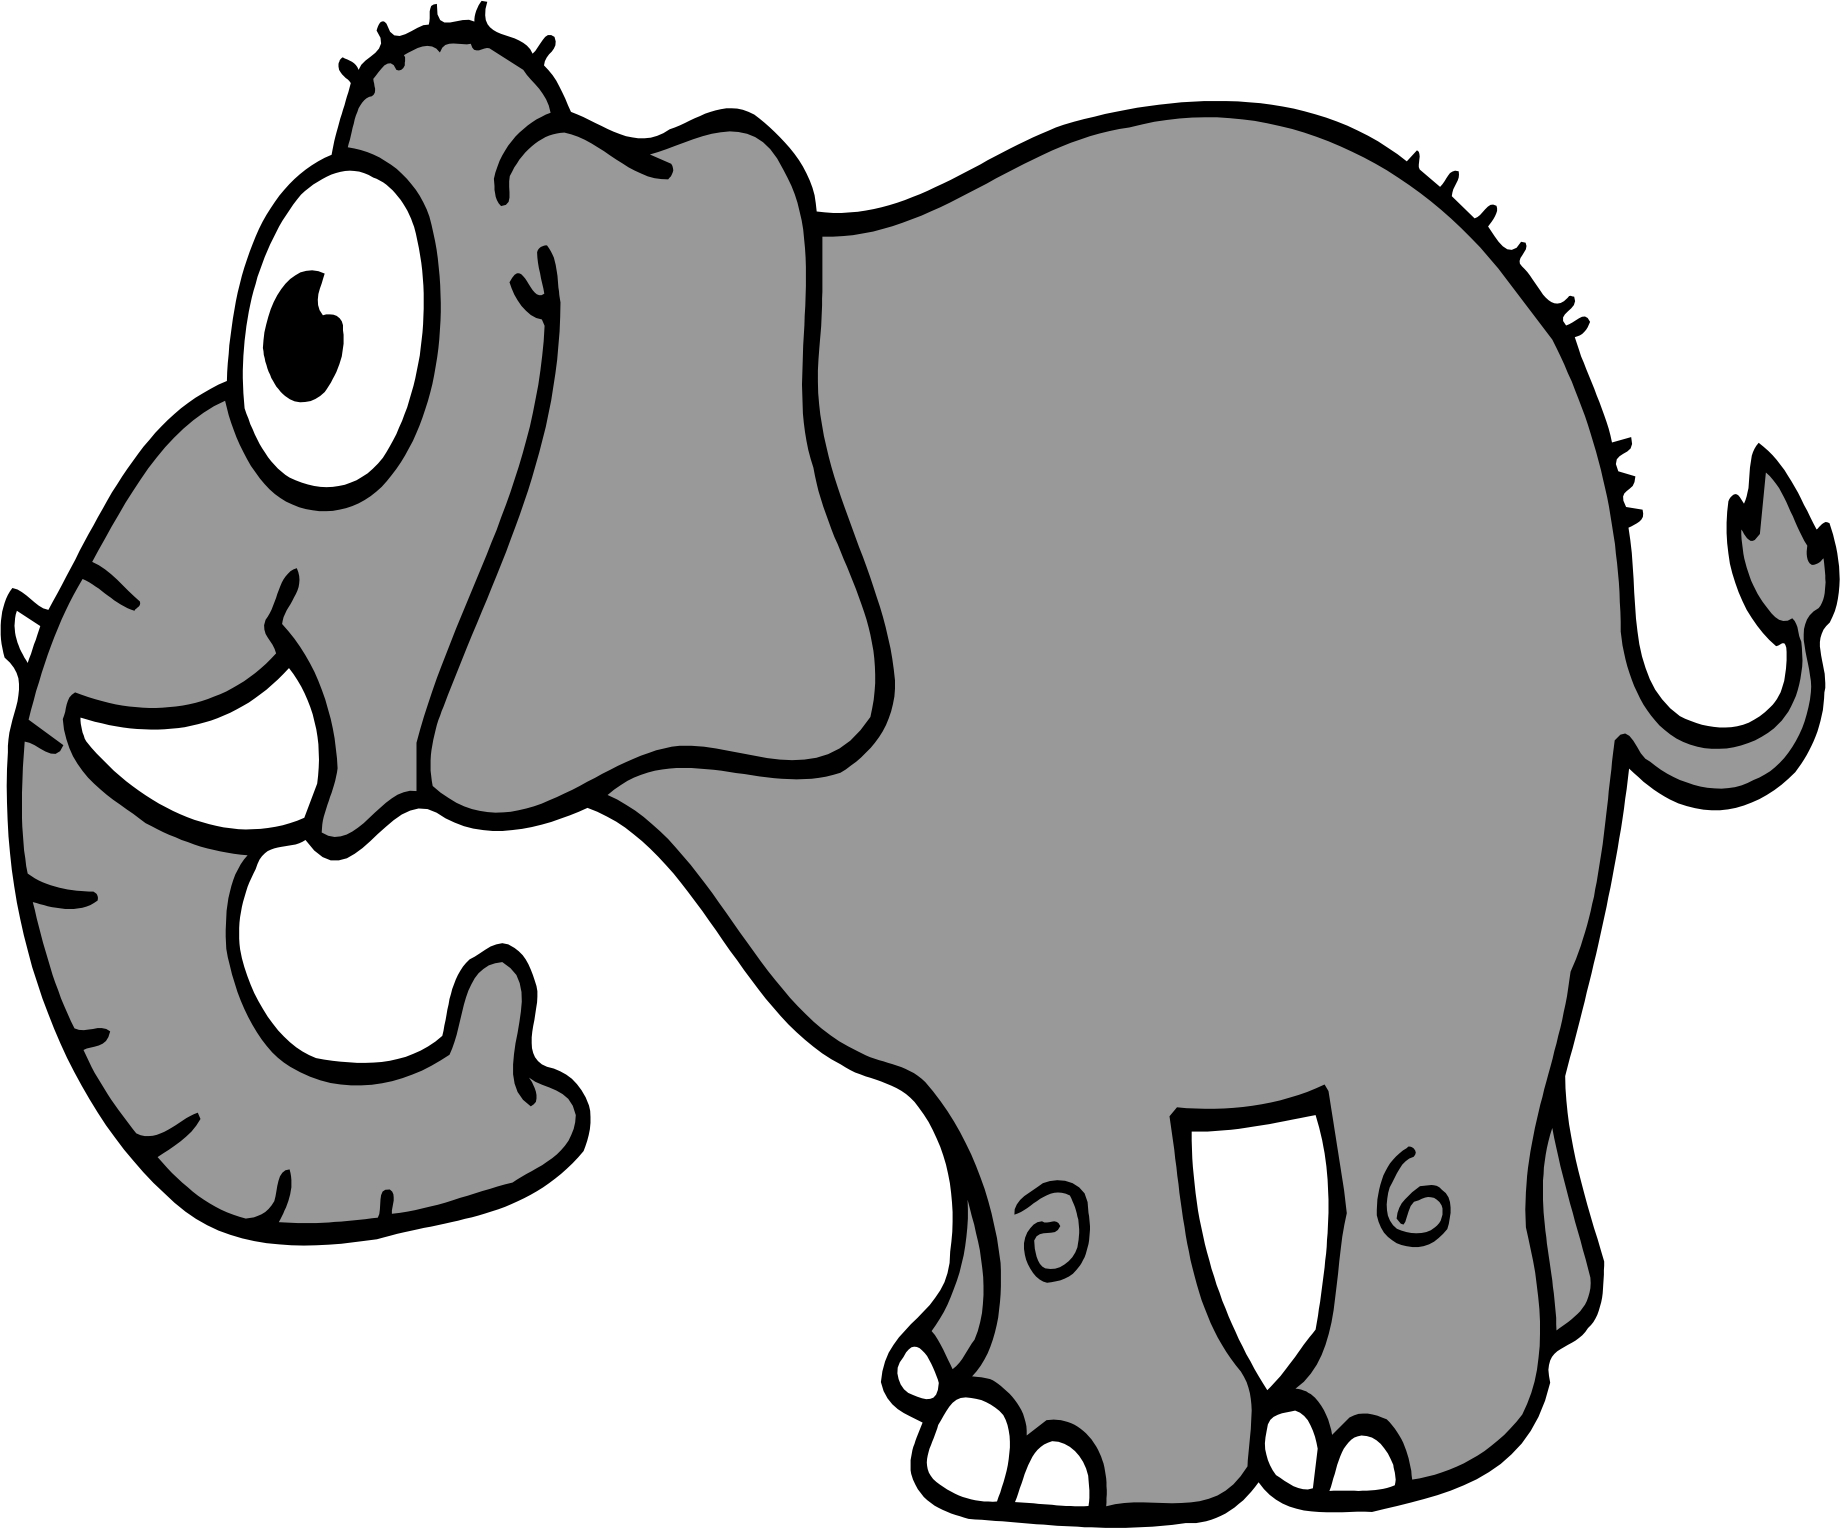 Featured image of post Funny Elephant Pictures Cartoon - All about elephants elephants never forget save the elephants elephants playing baby elephants asian elephant elephant love funny elephant elephant family.